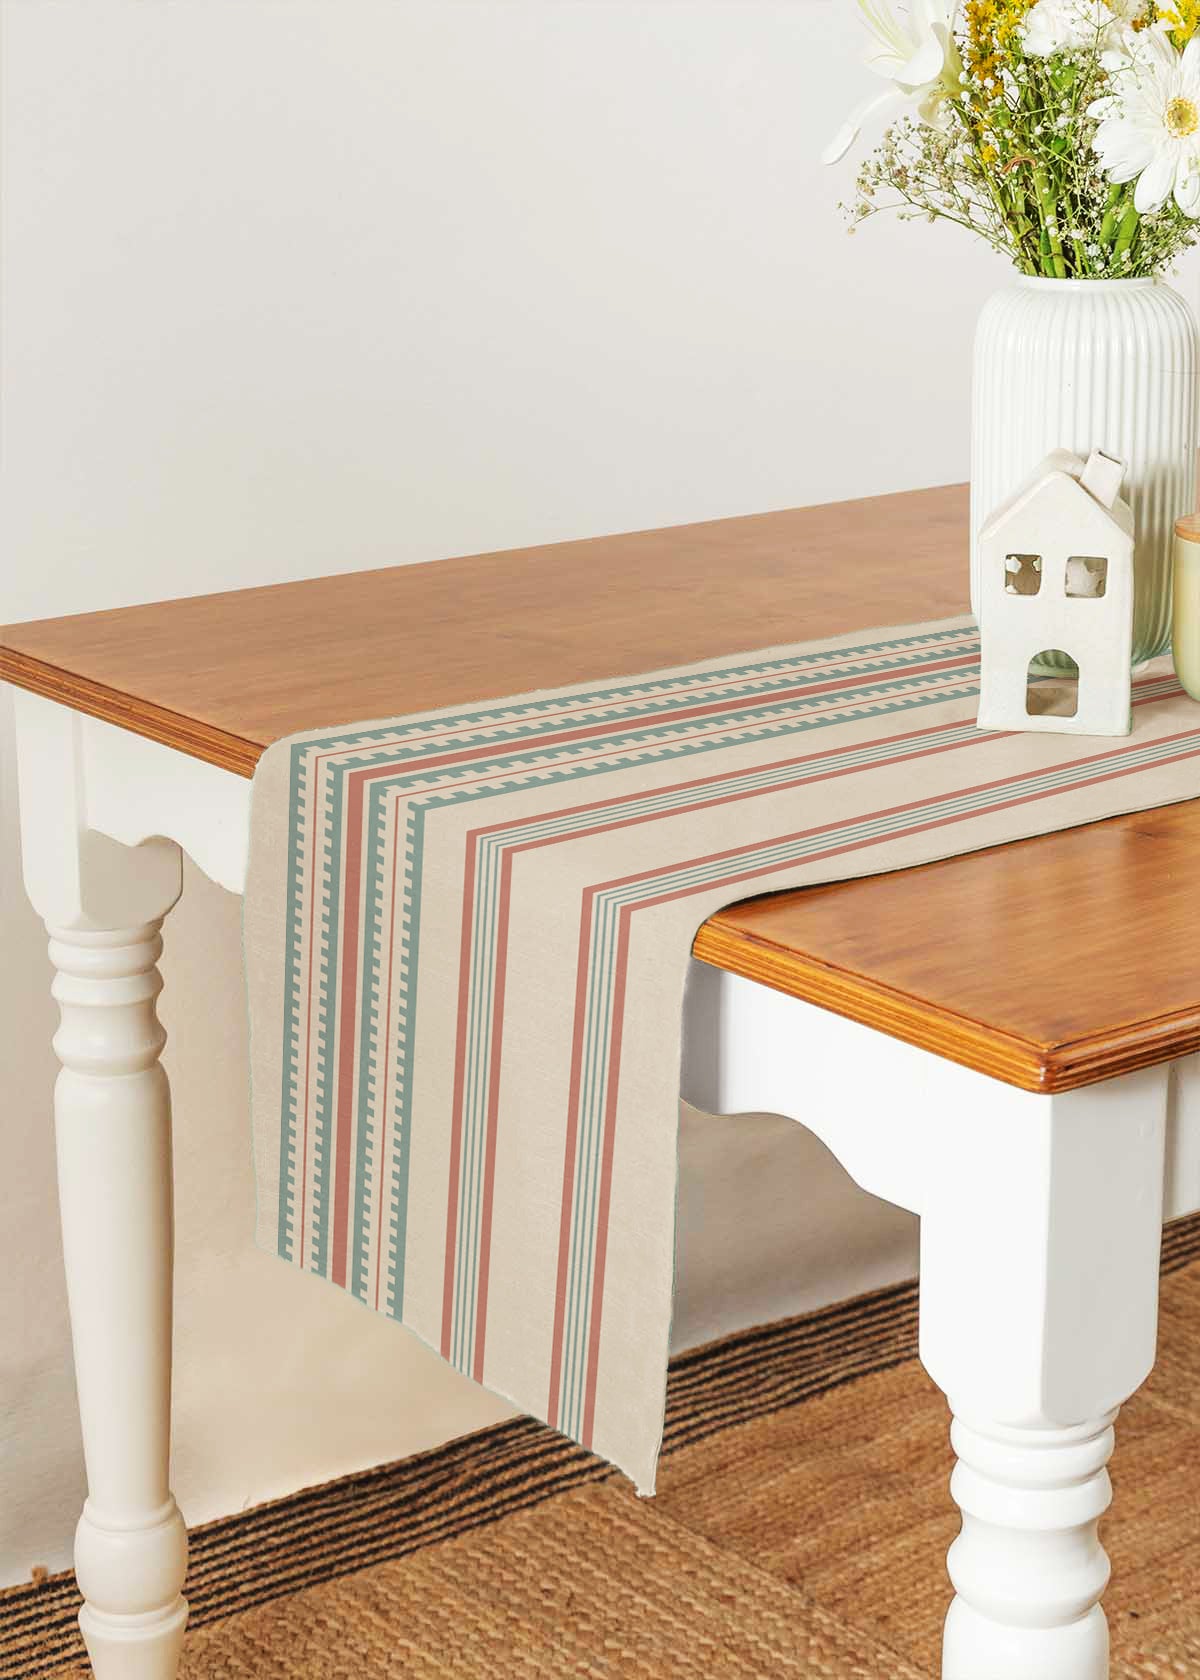 Roman Stripes 100% cotton geometric table runner for 4 seater or 6 seater dining - Multicolor